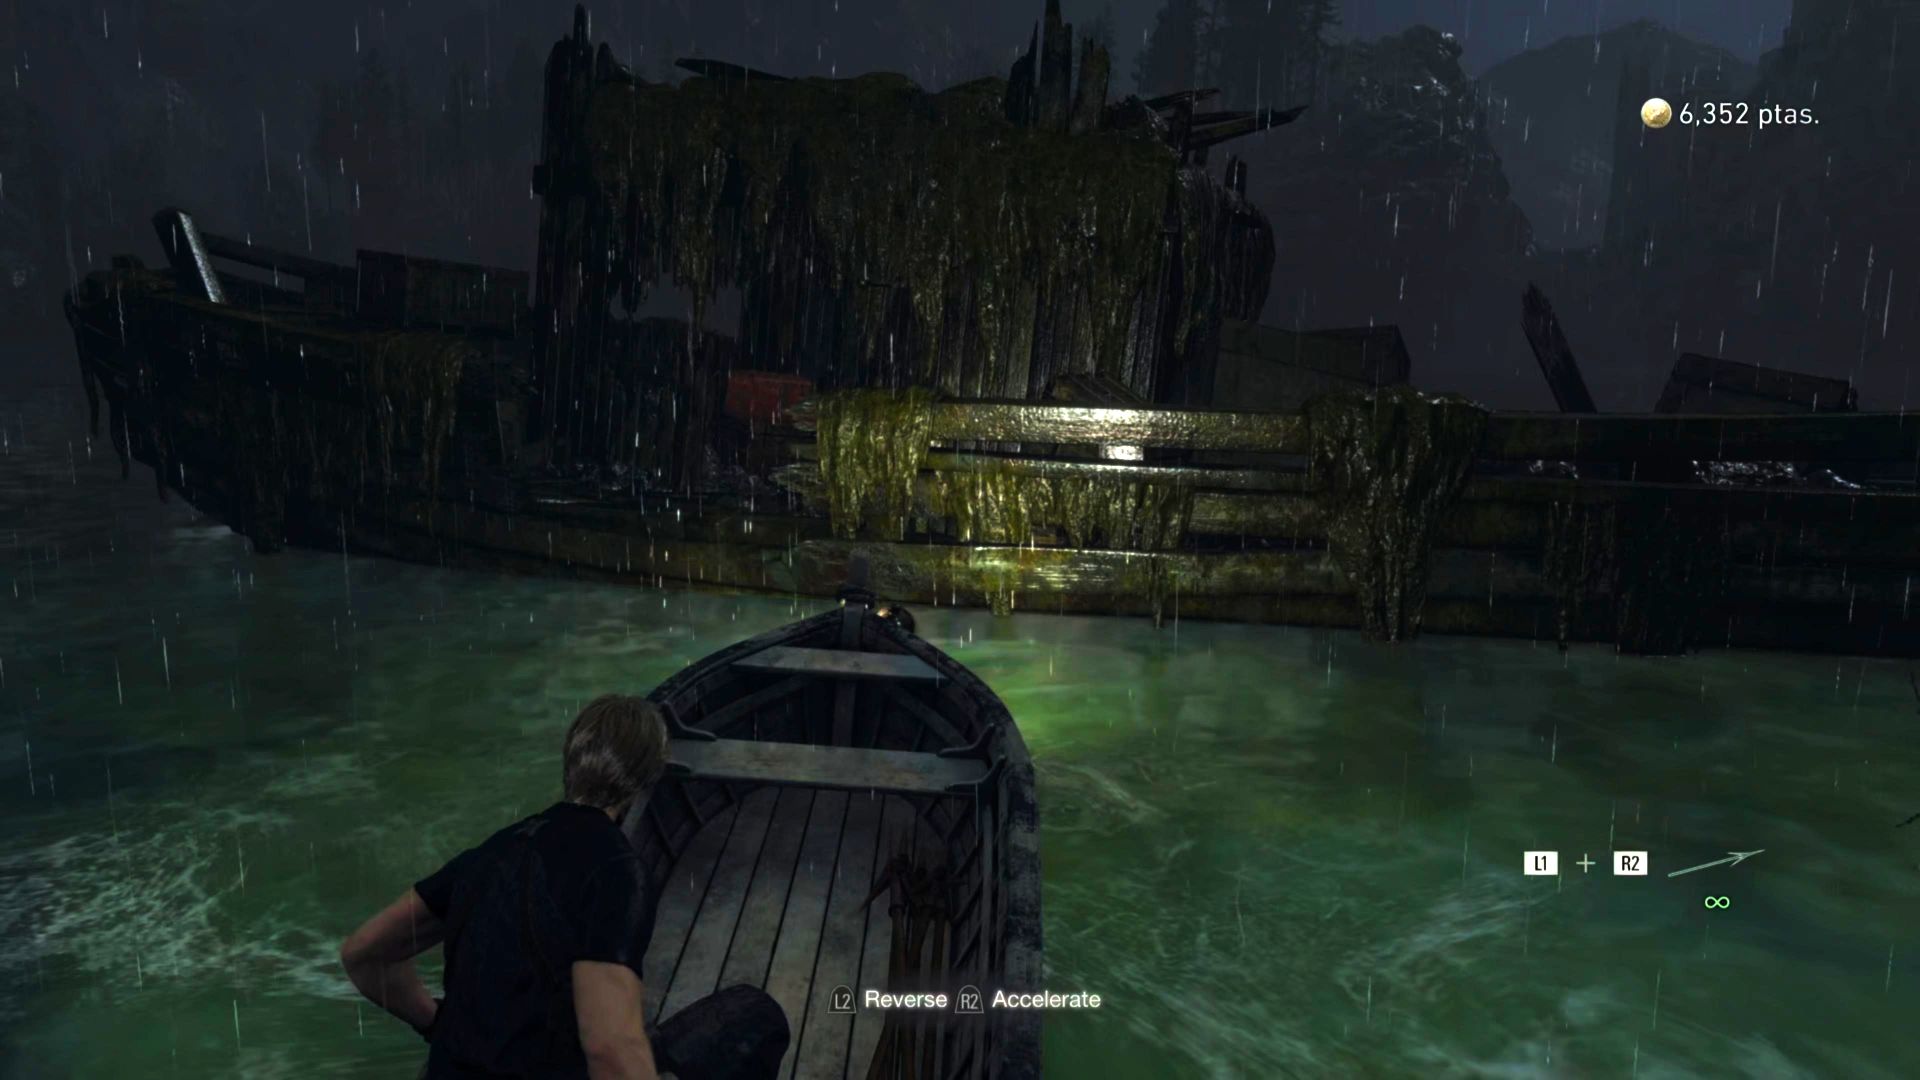 Resident Evil 4 Remake Red9 location: Leon approaches the dilapidated boat on the lake in his own small speedboat.